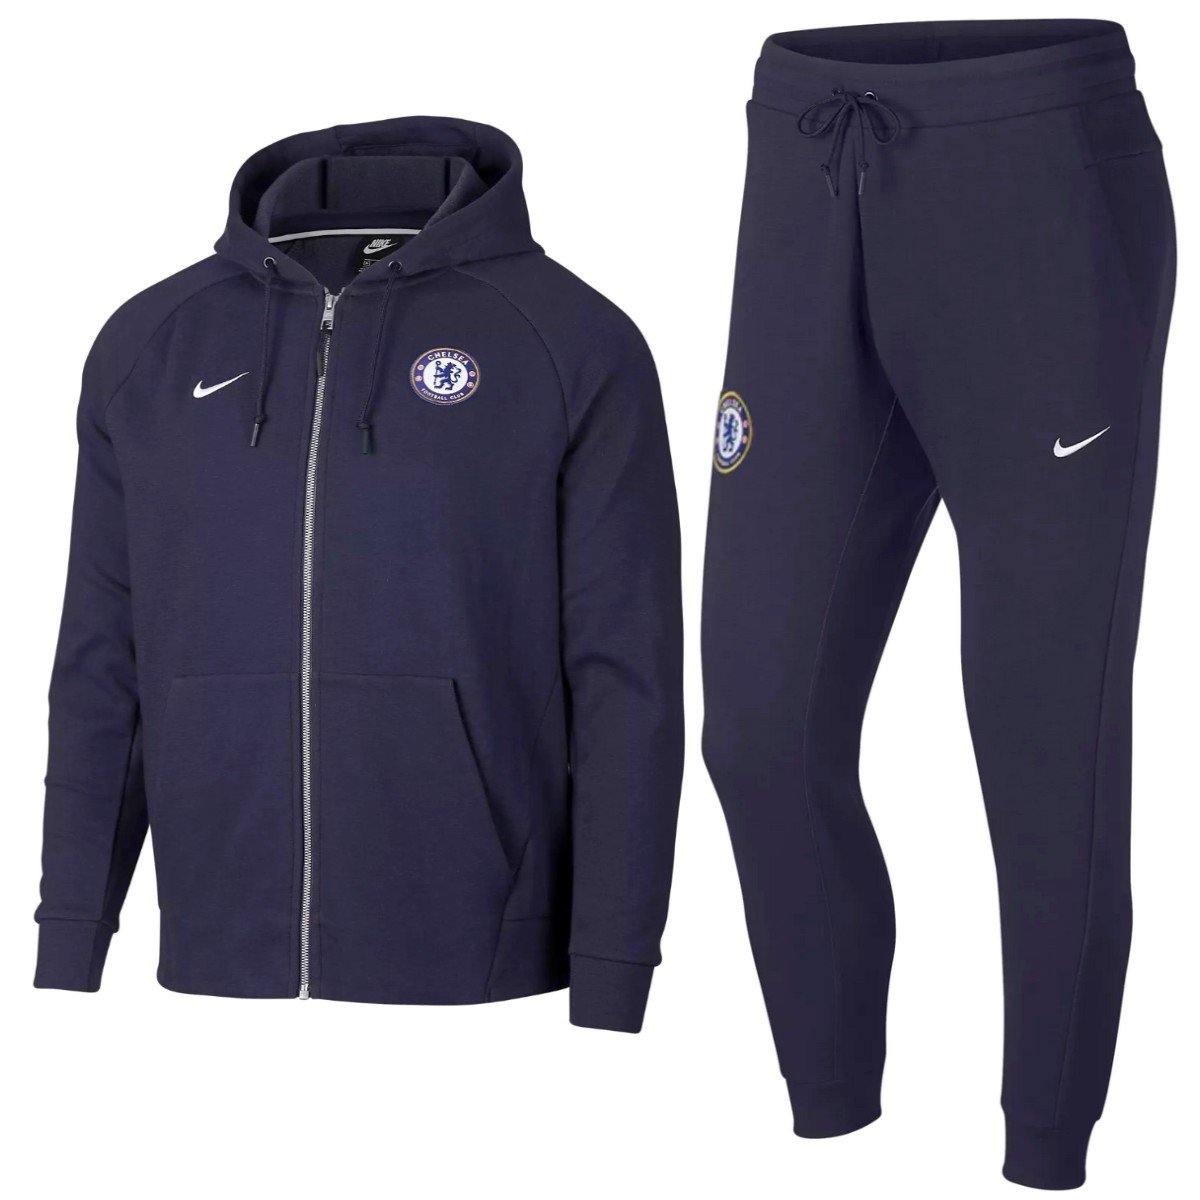 Chelsea FC hooded casual presentation soccer tracksuit 2018/19 - Nike ...